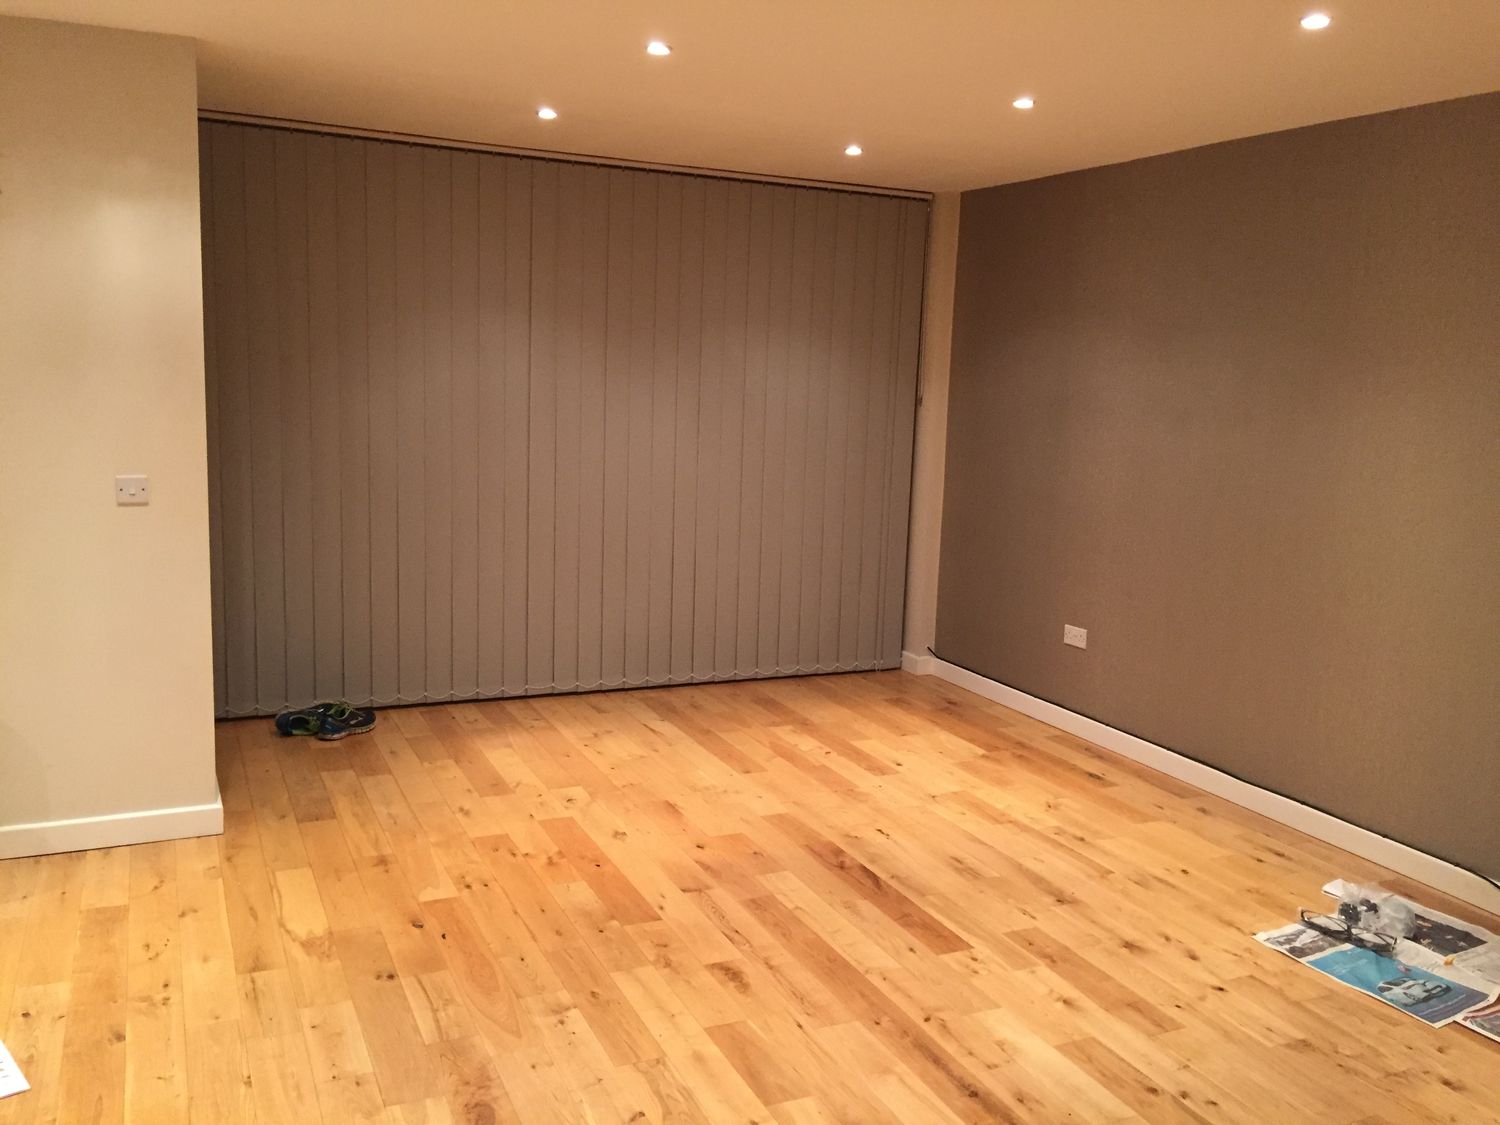 The before photo shows the empty room with a brown painted feature wall and beige walls.